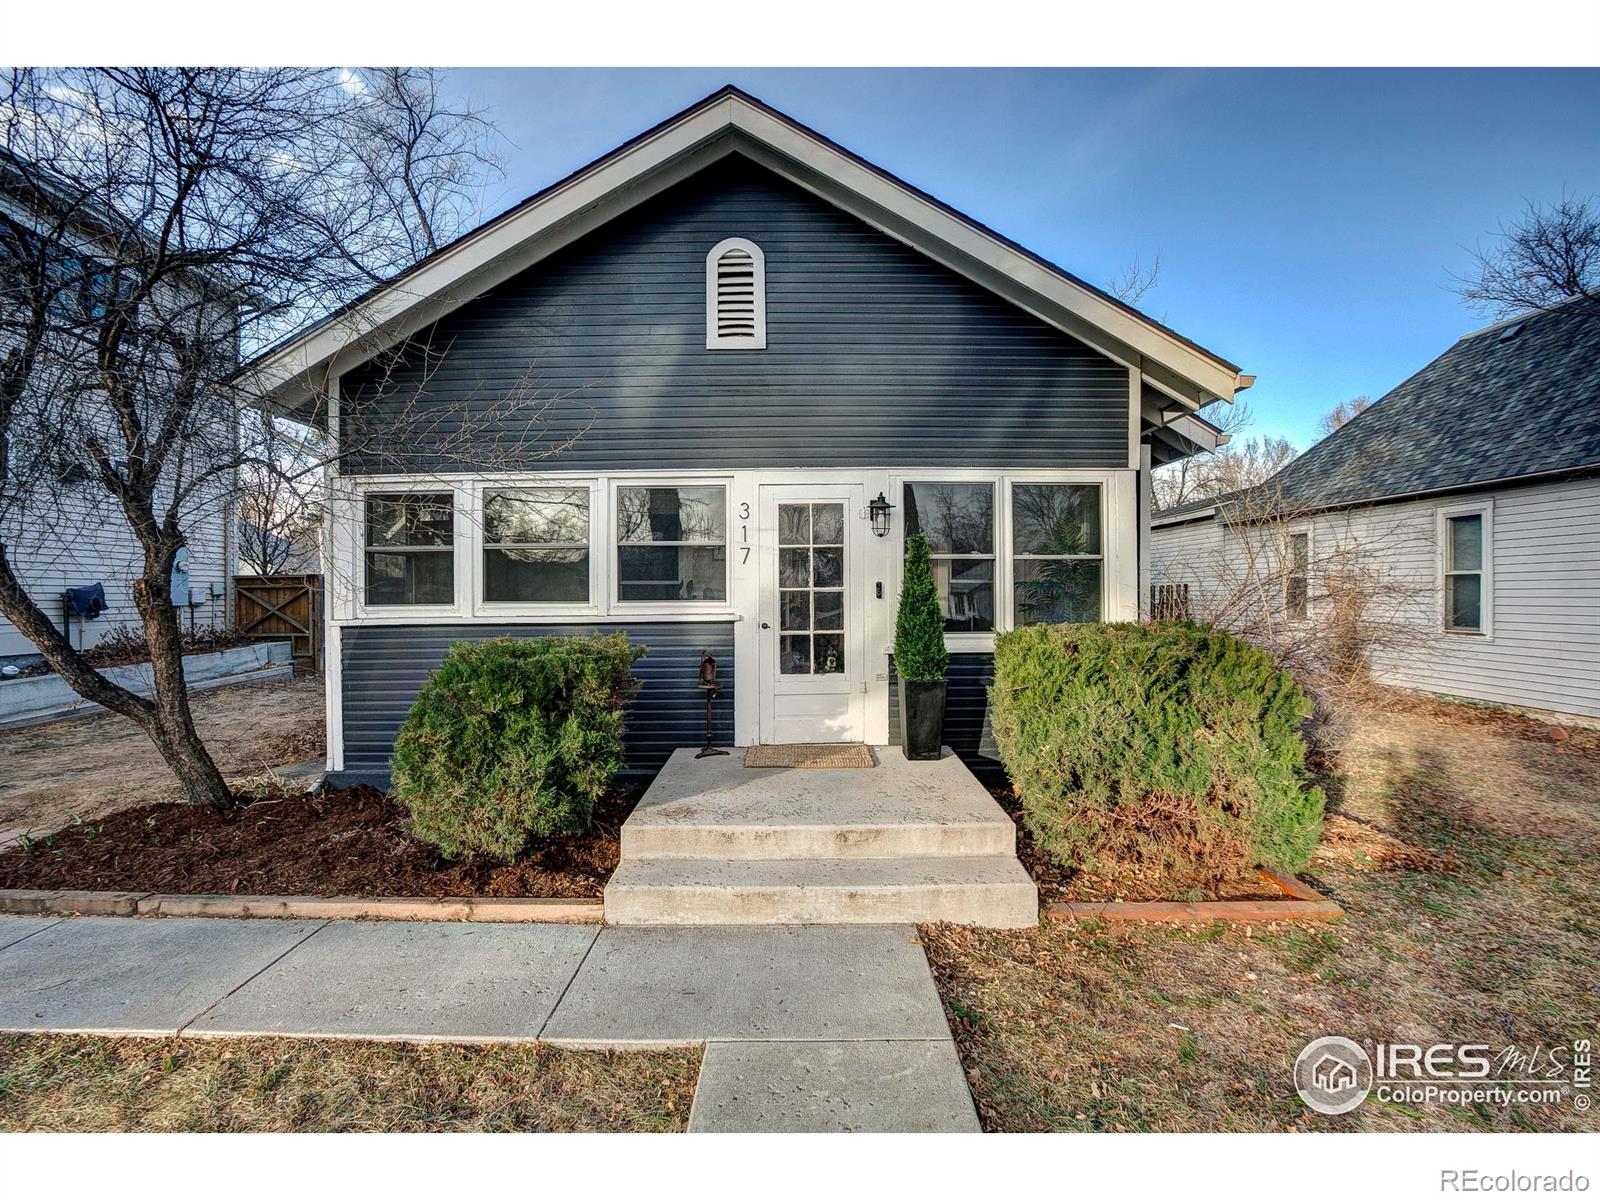 317 S Whitcomb Street, fort collins MLS: 4567891001531 Beds: 3 Baths: 1 Price: $660,000